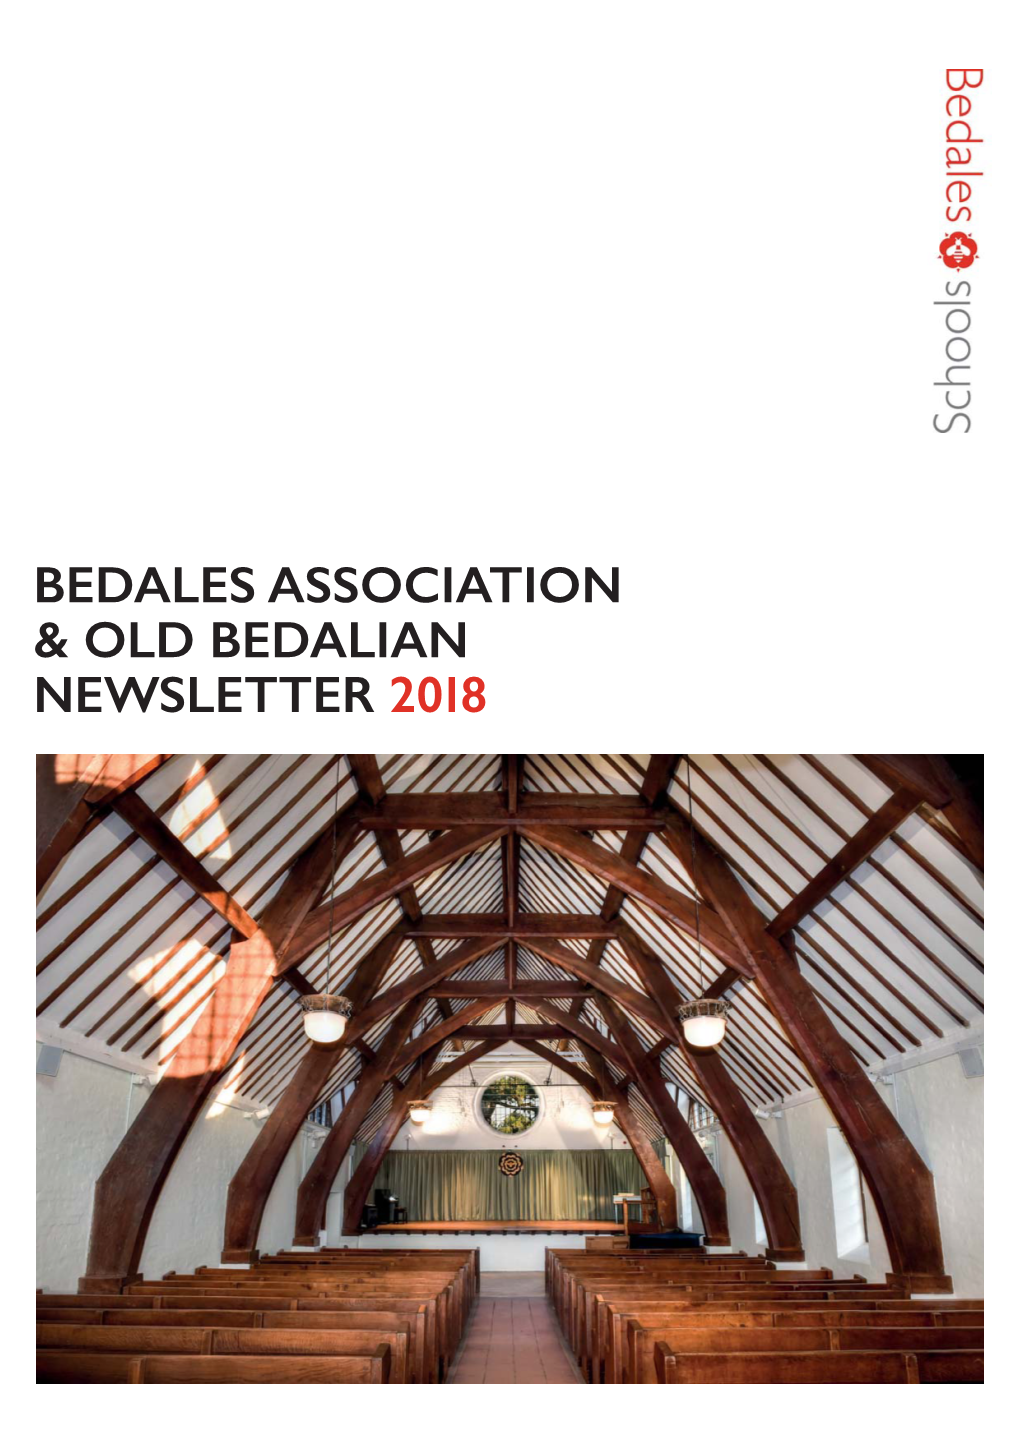 Bedales Association and Old Bedalian Newsletter, 2018